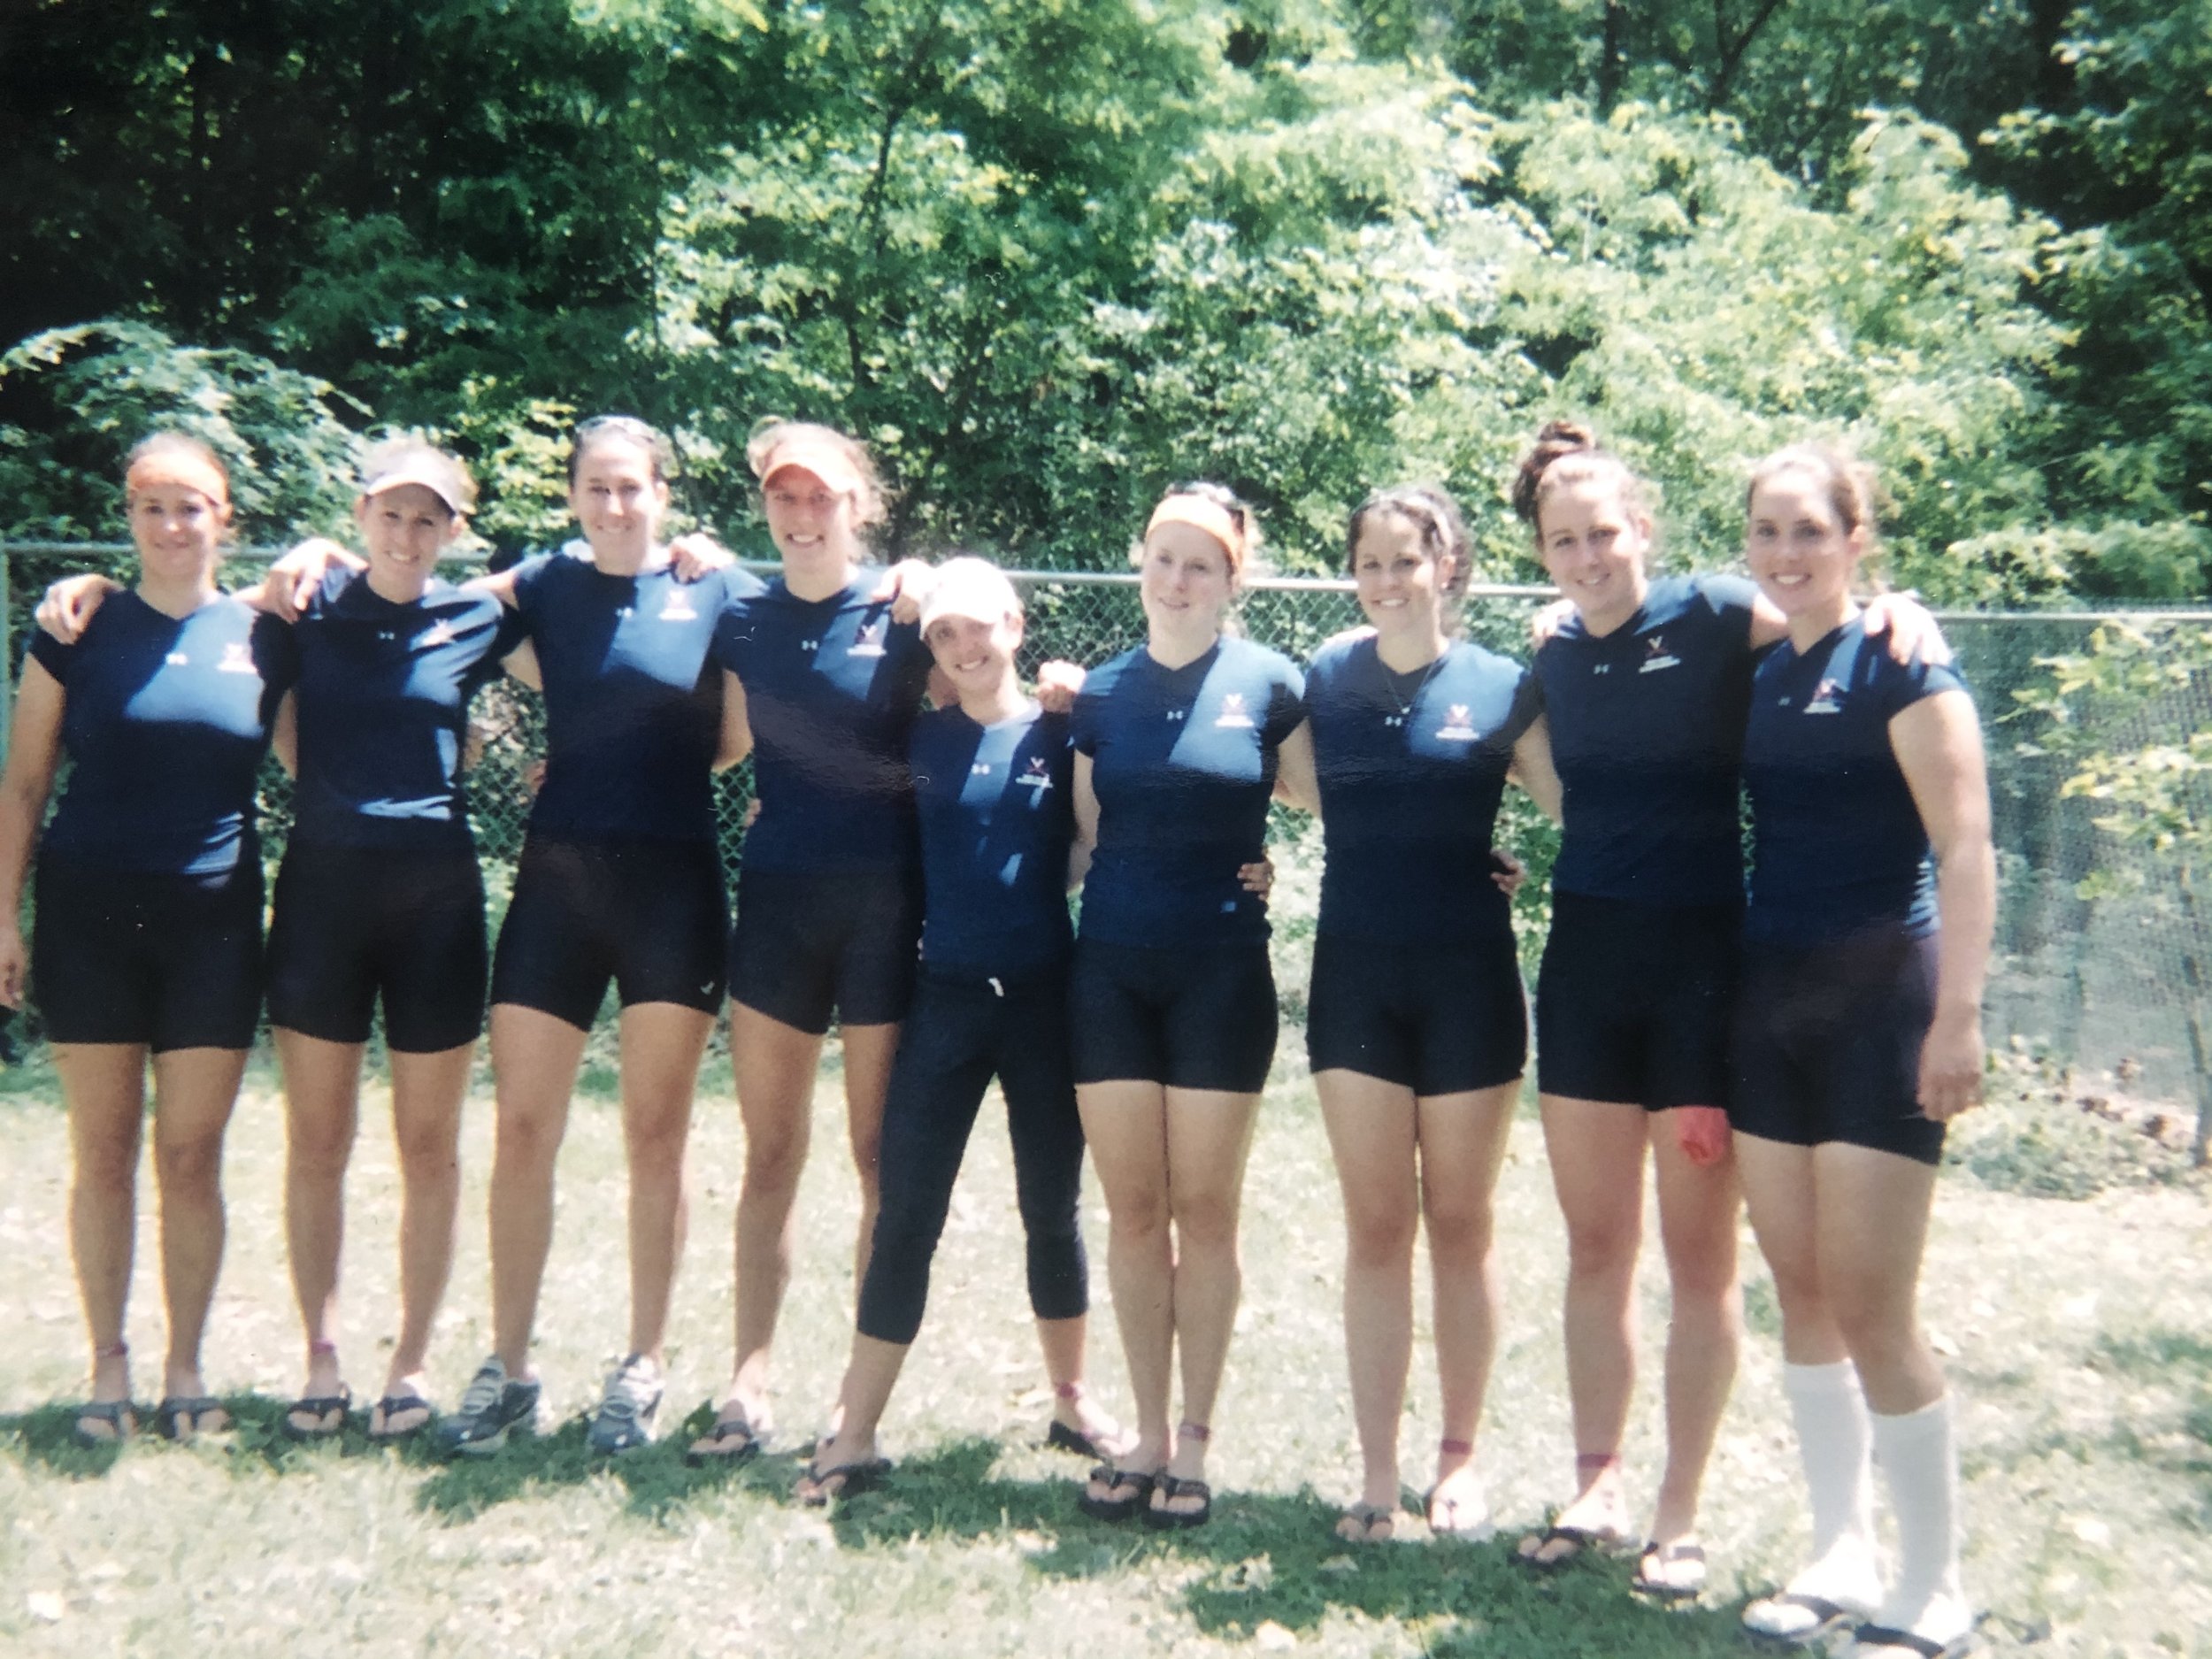  Lindsay, third from left, with her NCAA V8 during her senior year at the University of Virginia. 